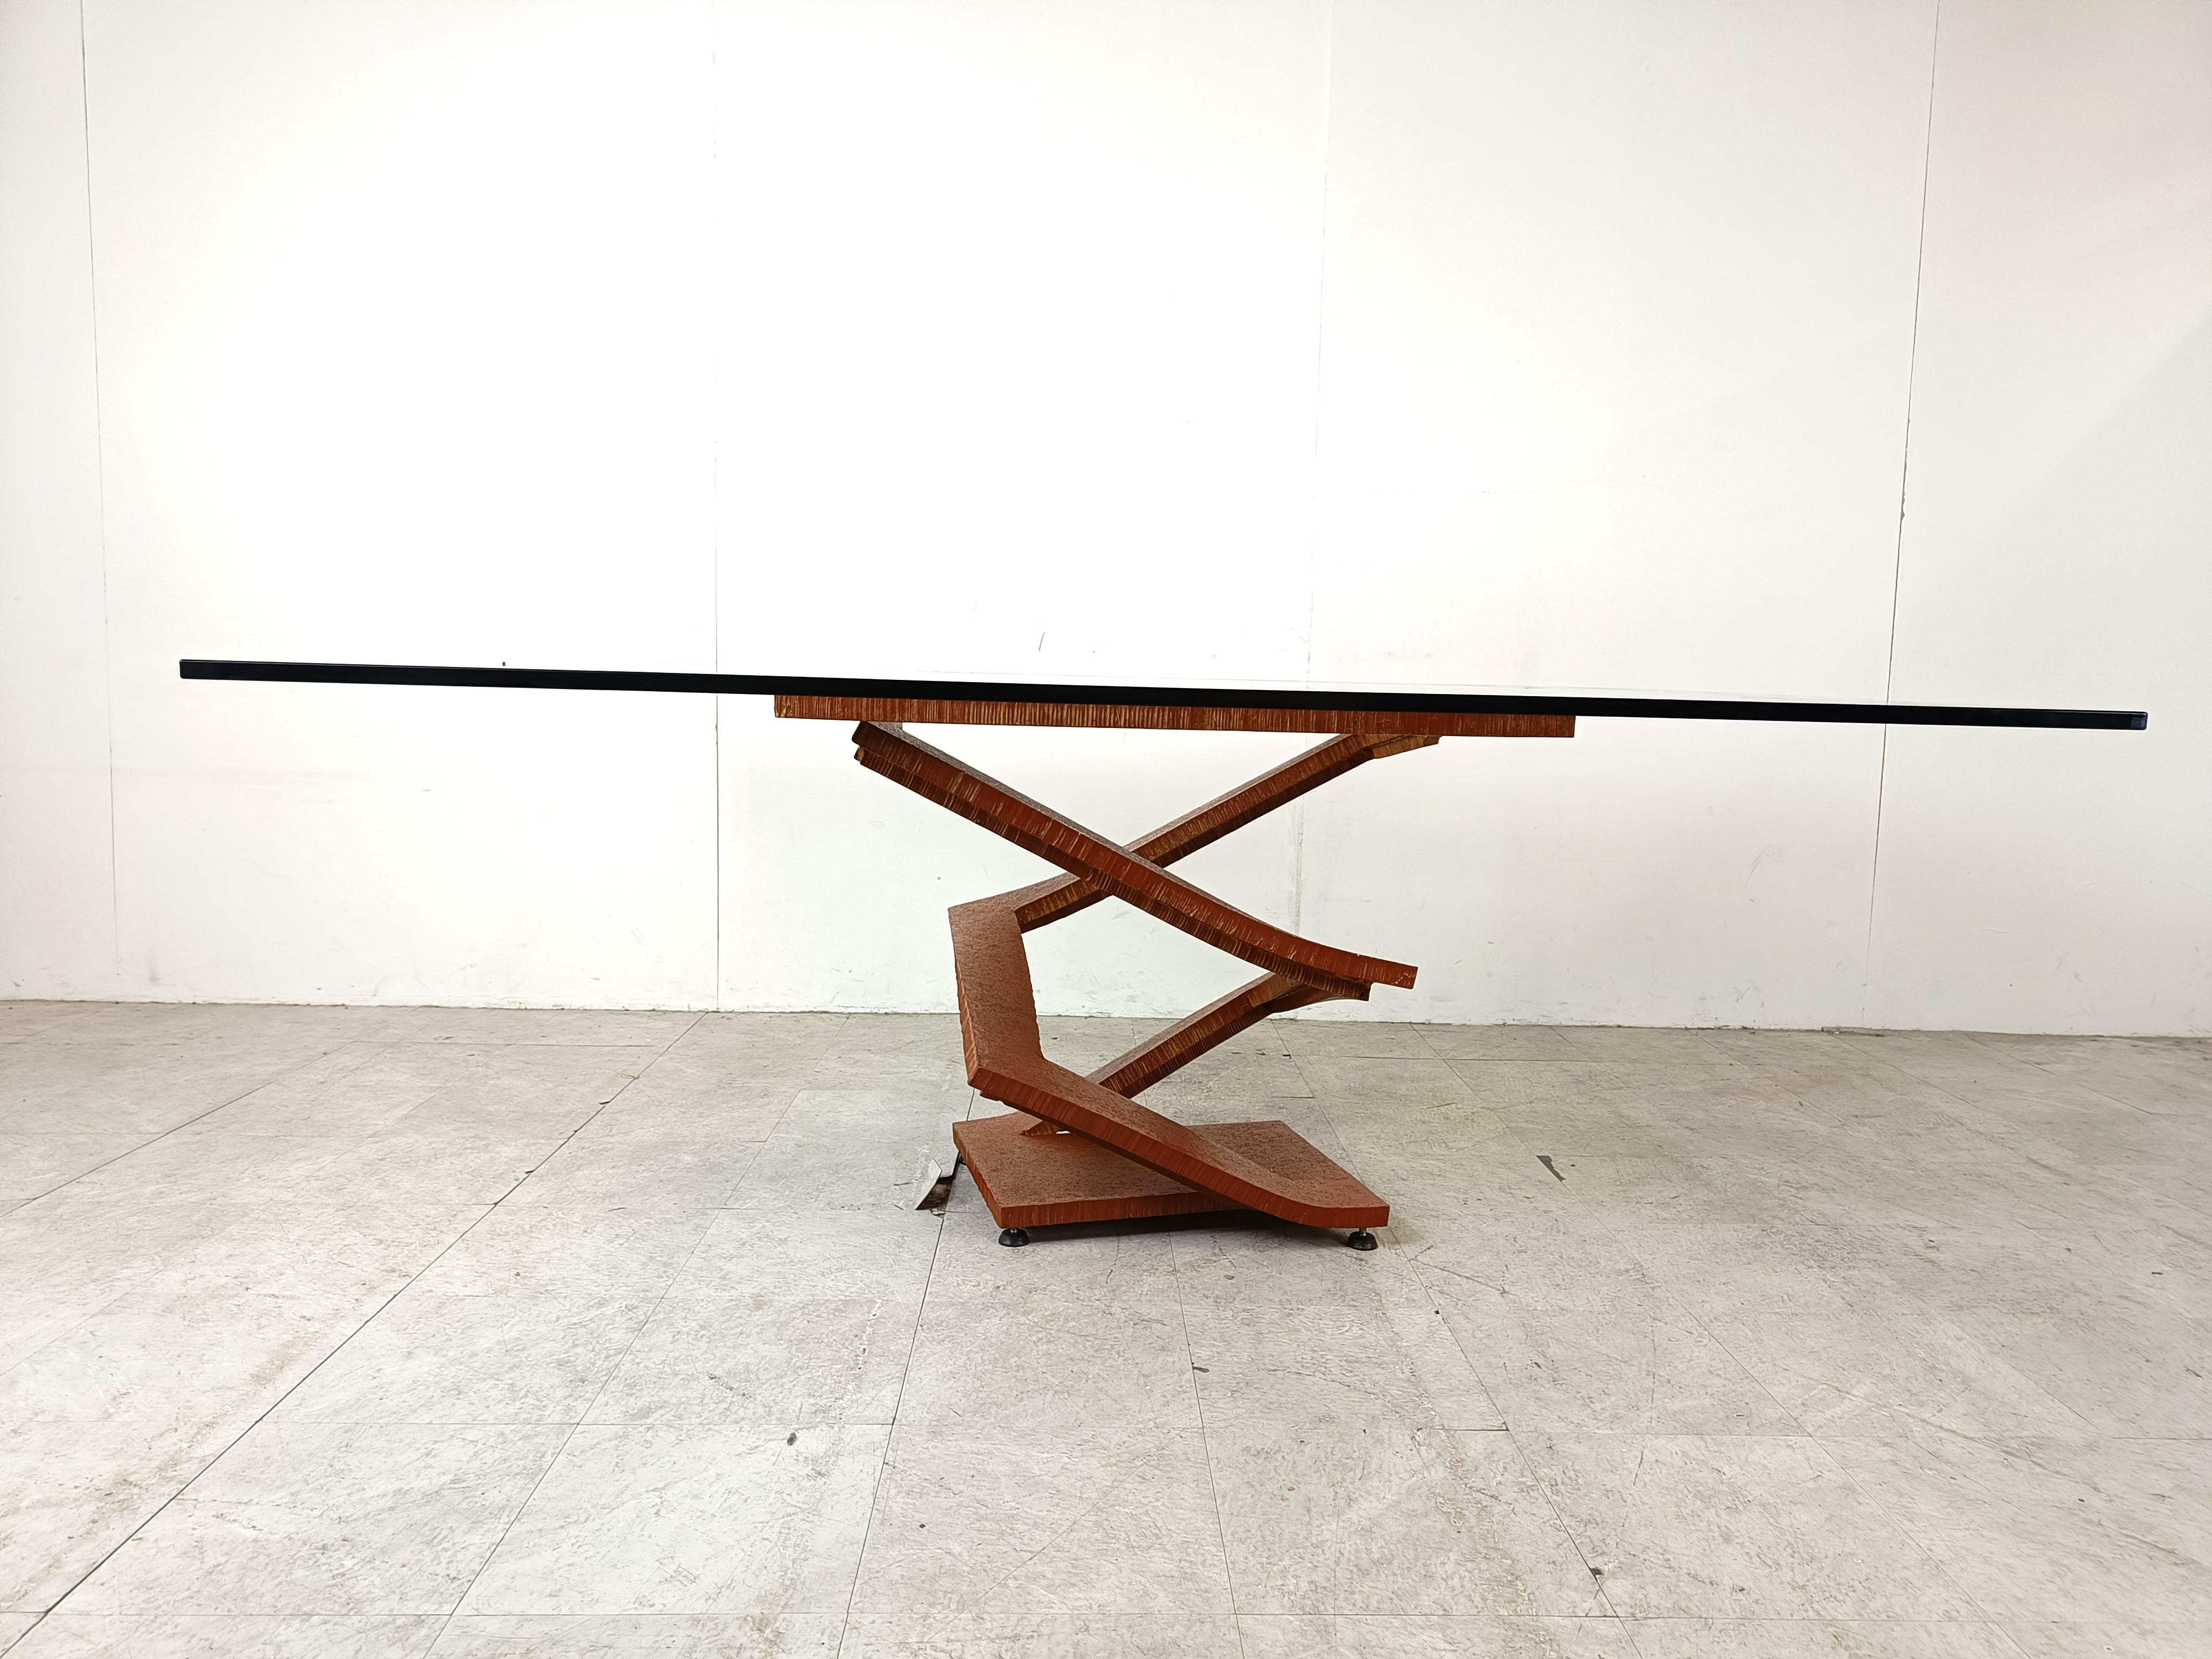 Impressive sculptural dining table consisting of a cut steel and bent base with a large rectangular glass top.

Striking and timeless design.

1990s - France

Good condition

Measurements:
Width: 190cm
Depth: 125cm
Height: 73cm

Ref.: 654114